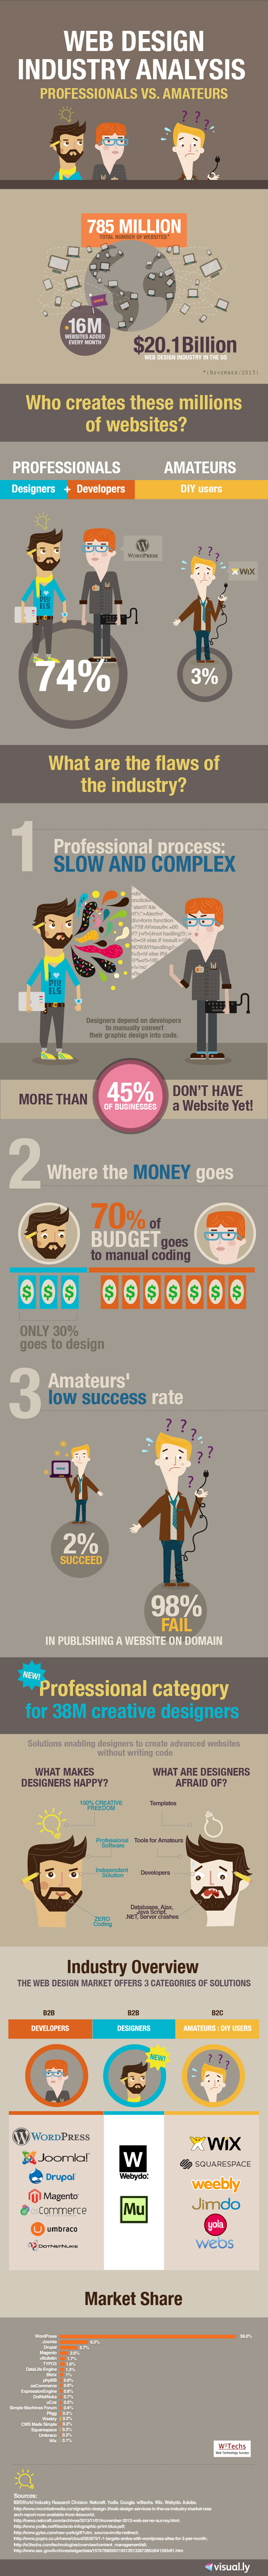 Web Design Industry Analysis professionals vs. amateurs Infographic 